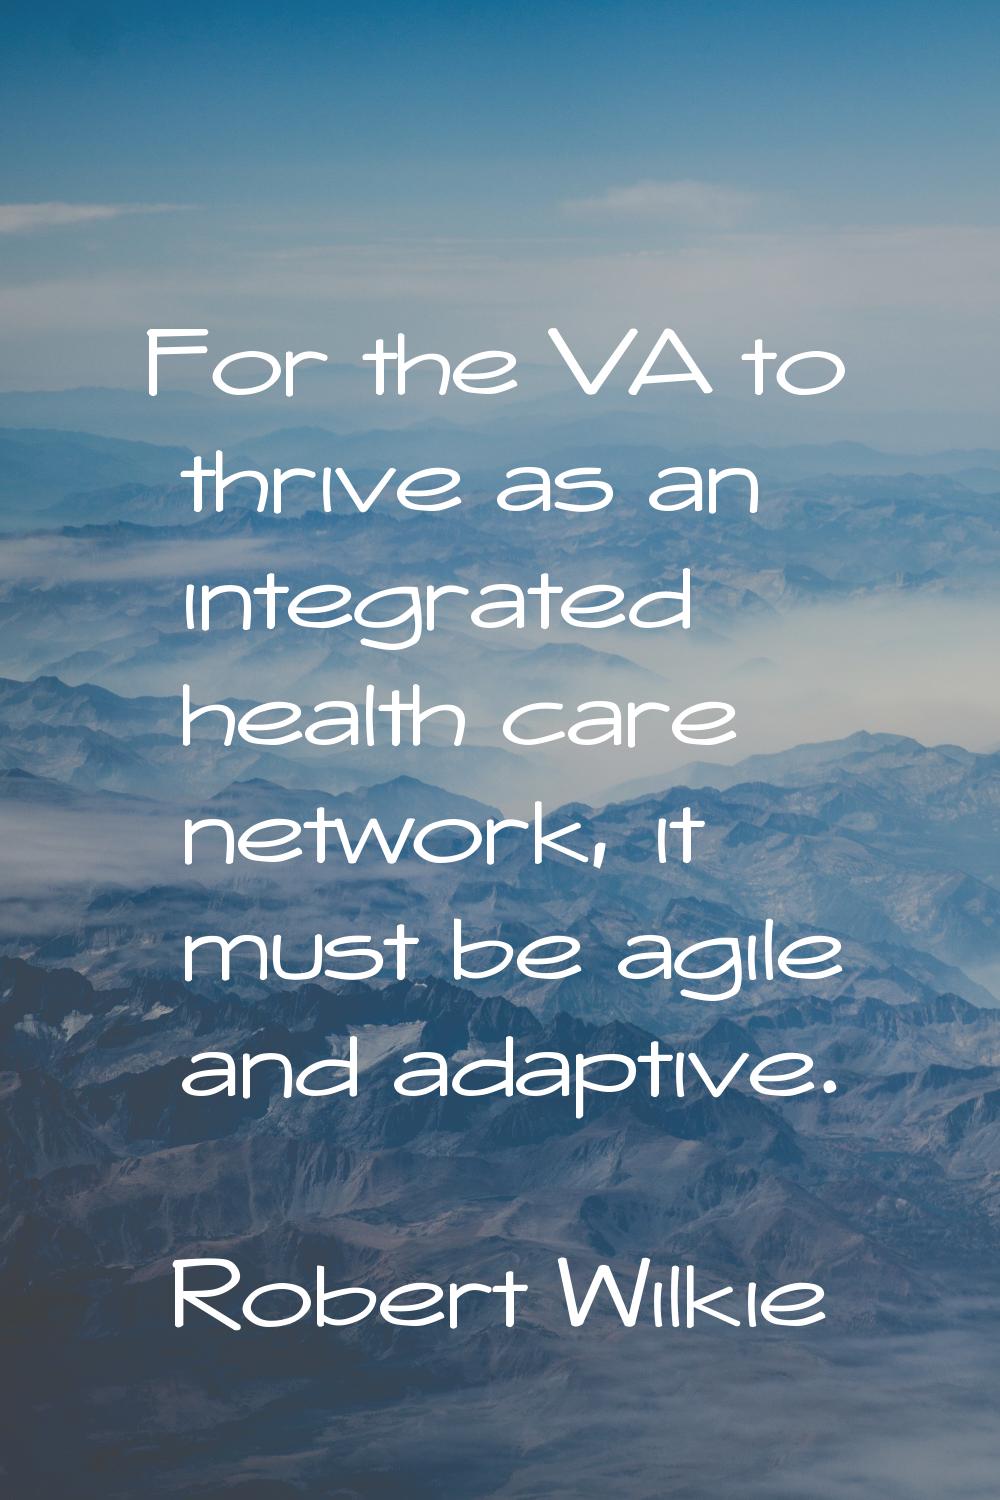 For the VA to thrive as an integrated health care network, it must be agile and adaptive.